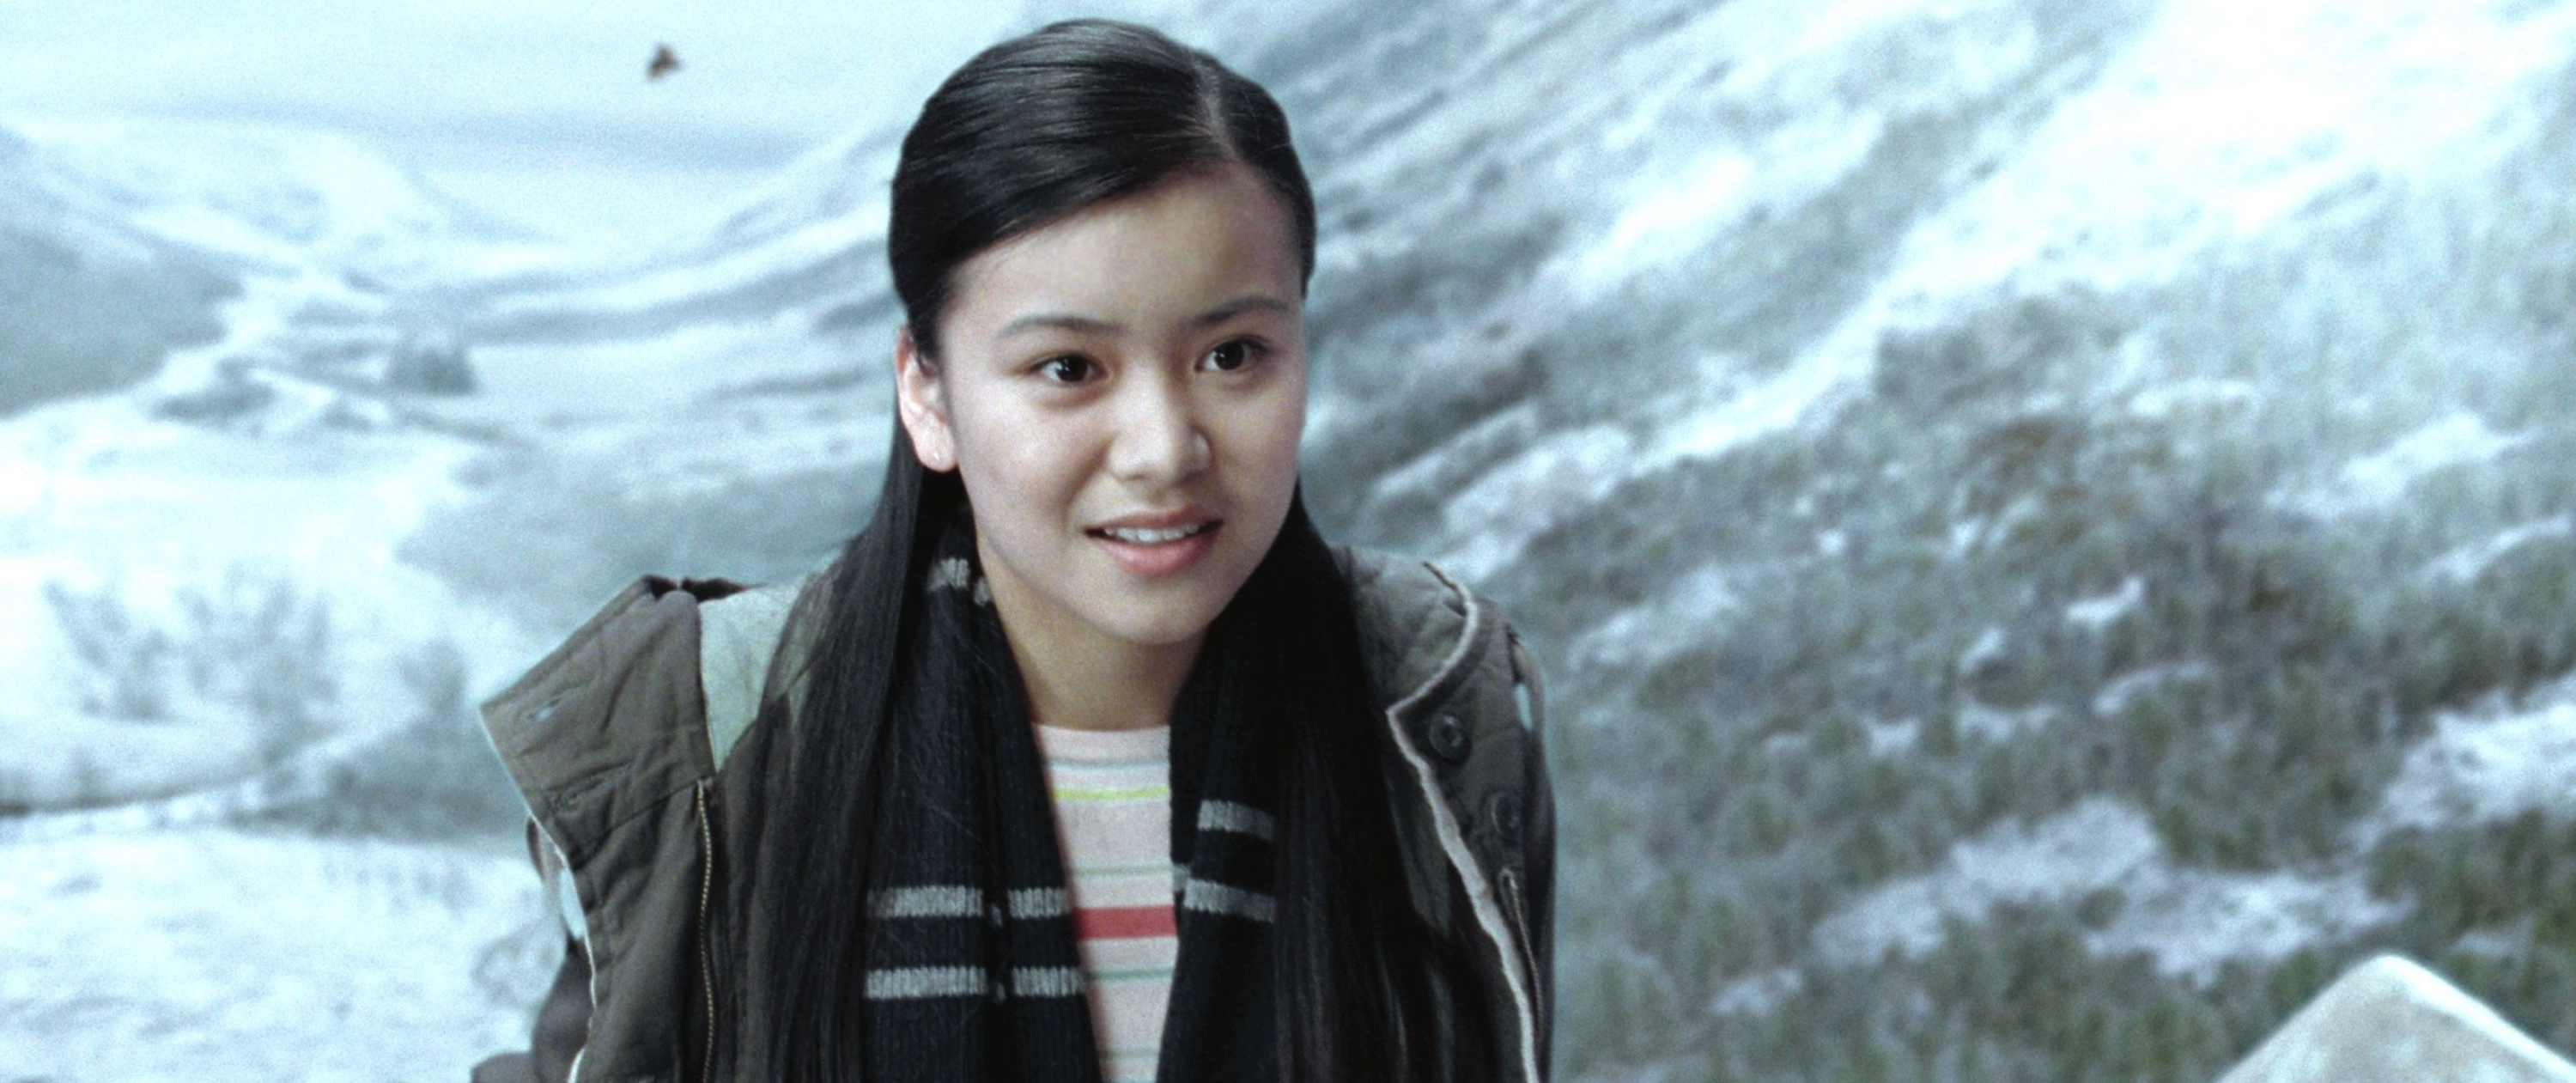 Cho Chang movies, Katie Leung interviews, Racist abuse, Overcoming challenges, 3000x1270 Dual Screen Desktop